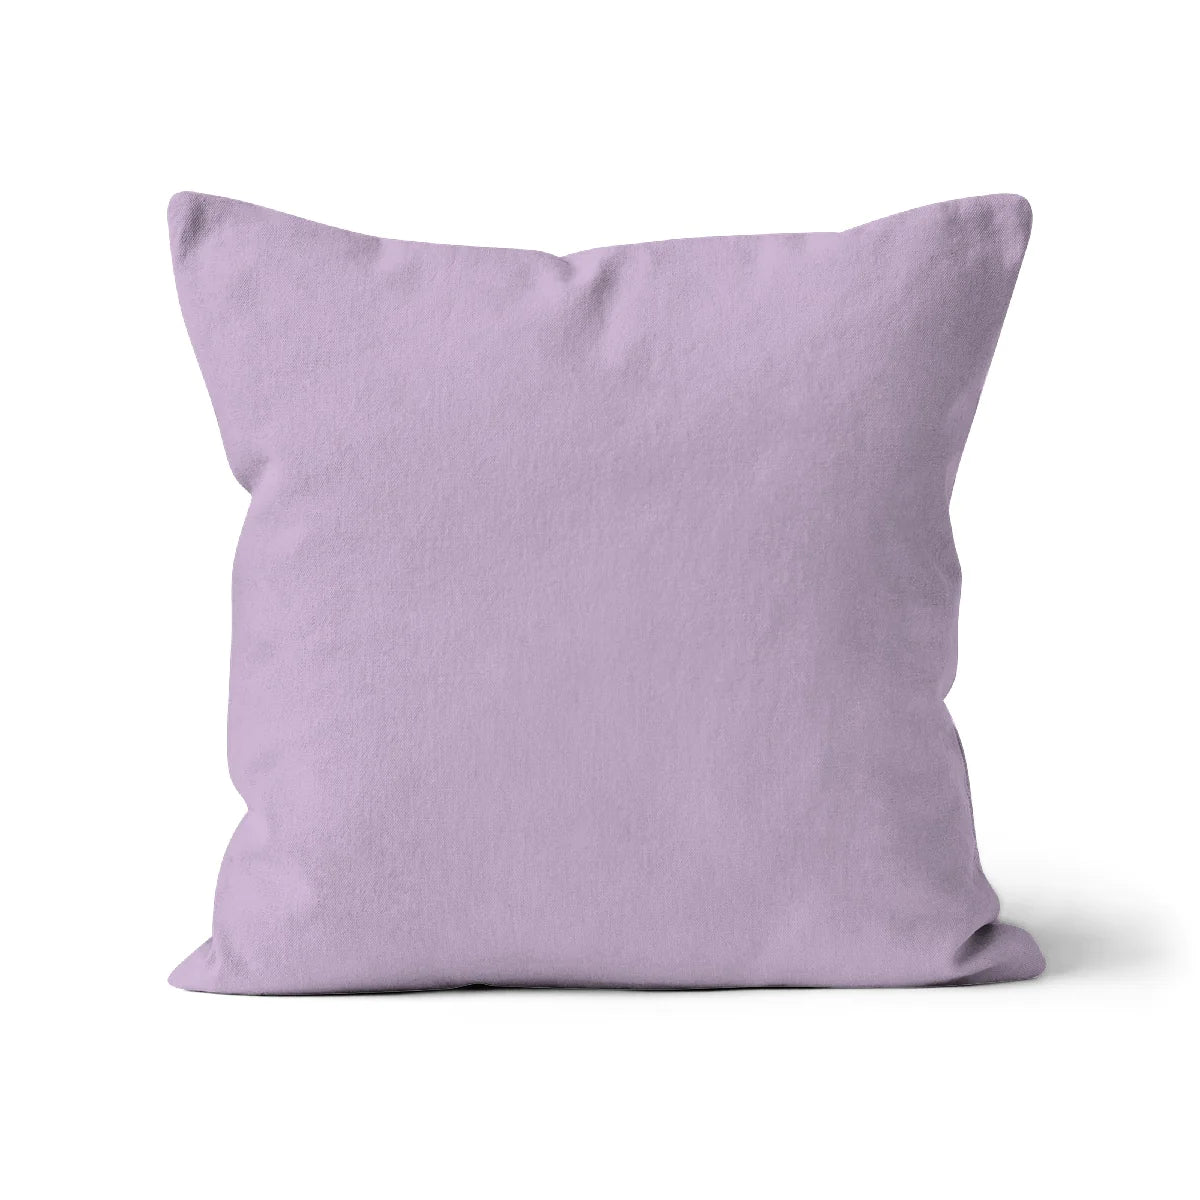  Lilac cushion, Lavender pillow, Purple throw pillow, Decorative accent cushion, Soft and plush pillow, Violet square cushion, Floral patterned throw, Cozy home decor, Elegant living room accessory, Pastel accent piece, Comfortable sofa cushion, Bedroom decor, Lavender-themed home accessory, Handcrafted cushion, Spring-inspired throw pillow, Lilac and white design, Feminine home decor, Relaxing color scheme, Stylish home furnishing, Cushion for relaxation.